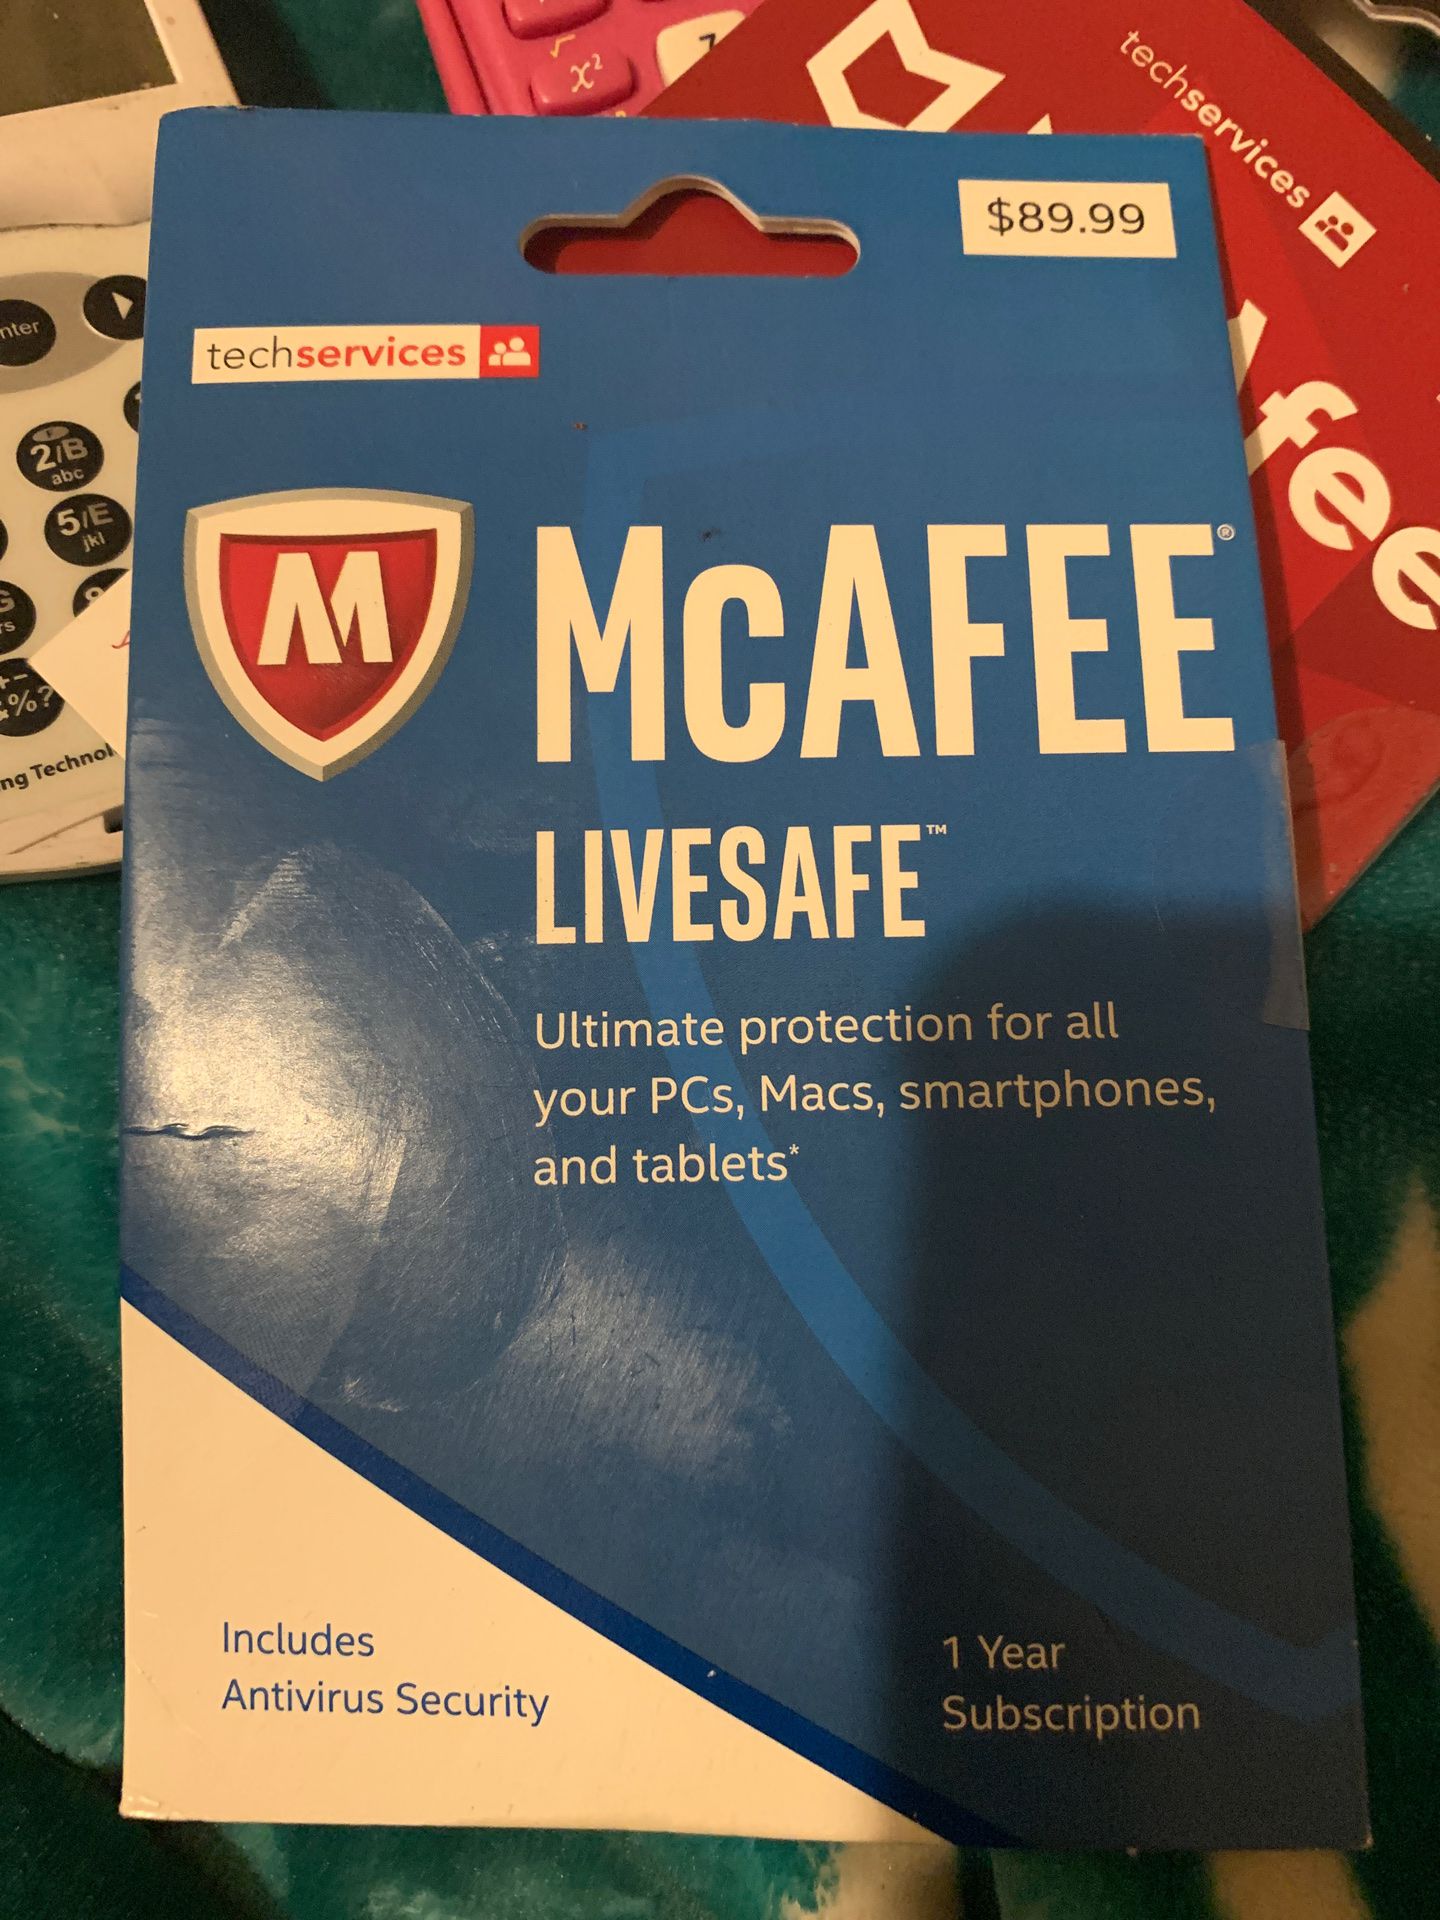 Techservices Mcafee Livesafe